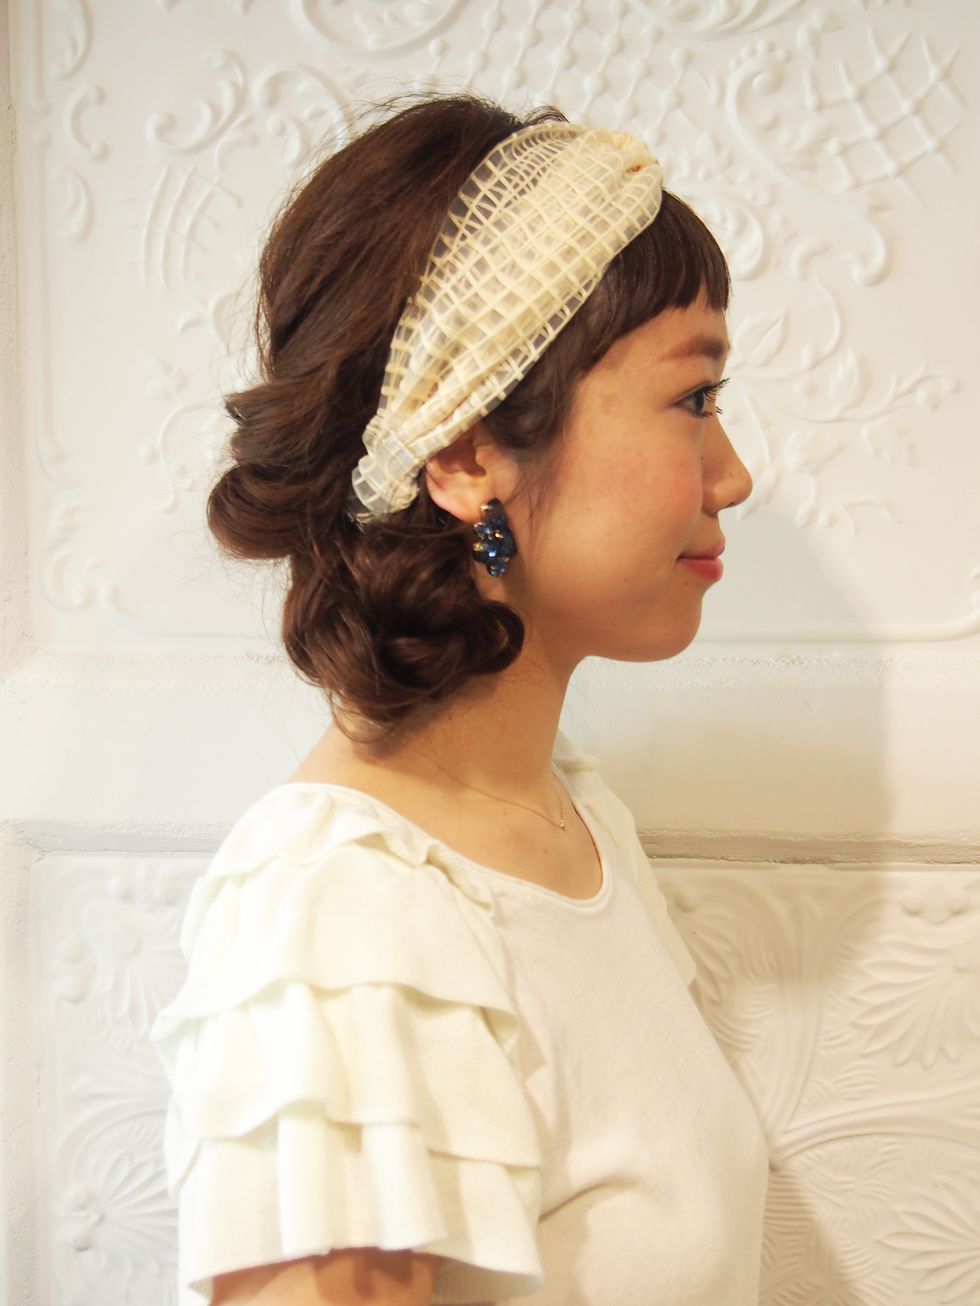 Hairstyle, Forehead, Hair accessory, Headpiece, Style, Bridal accessory, Fashion accessory, Headgear, Headband, Ivory, 